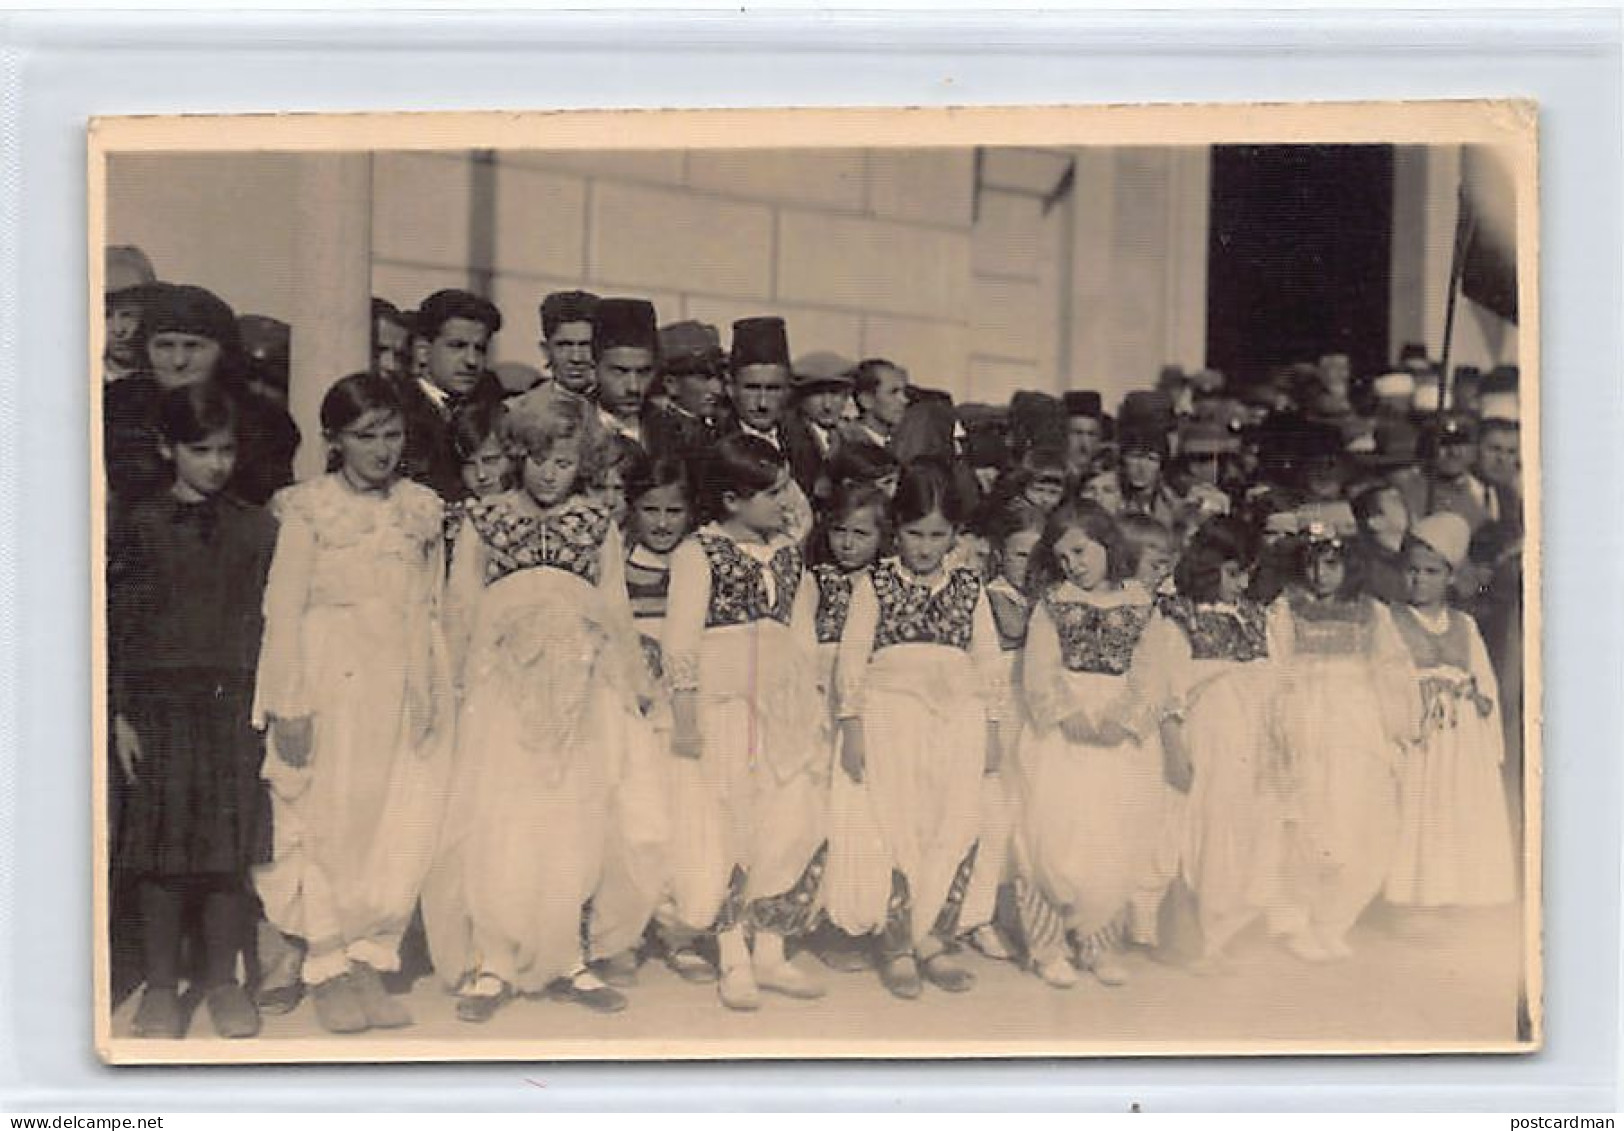 Albania - TIRANA - National Day Parade - Group Of Children In National Costume - REAL PHOTO (circa 1932) - Publ. Agence  - Albania